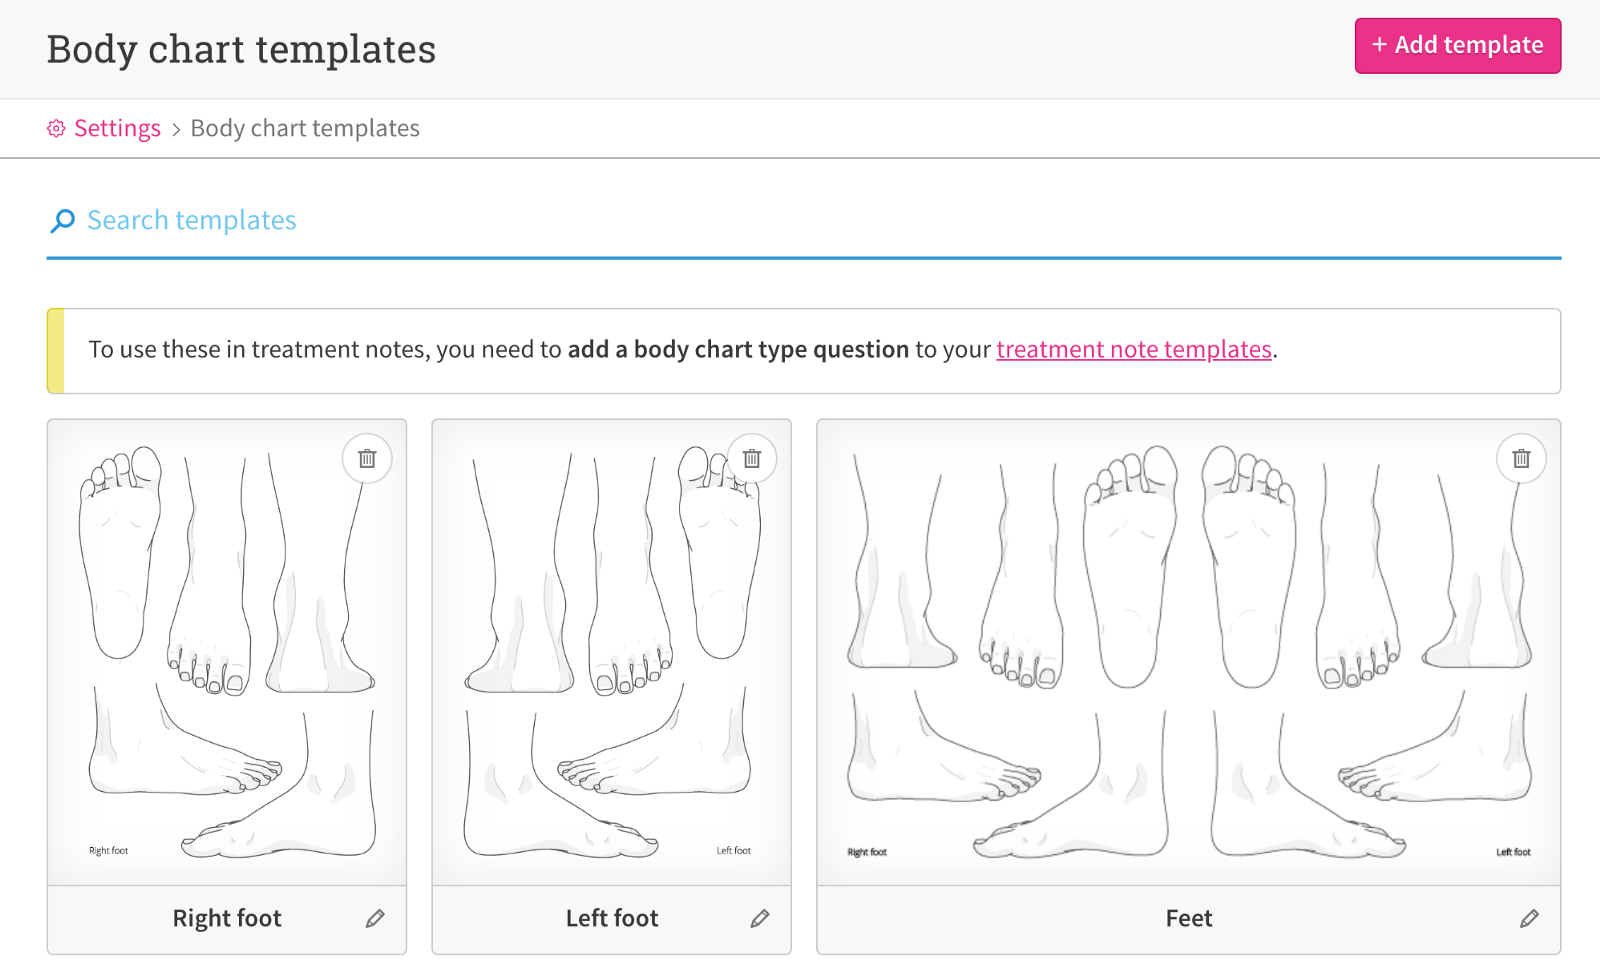 Foot diagrams are now included in Body Charts!